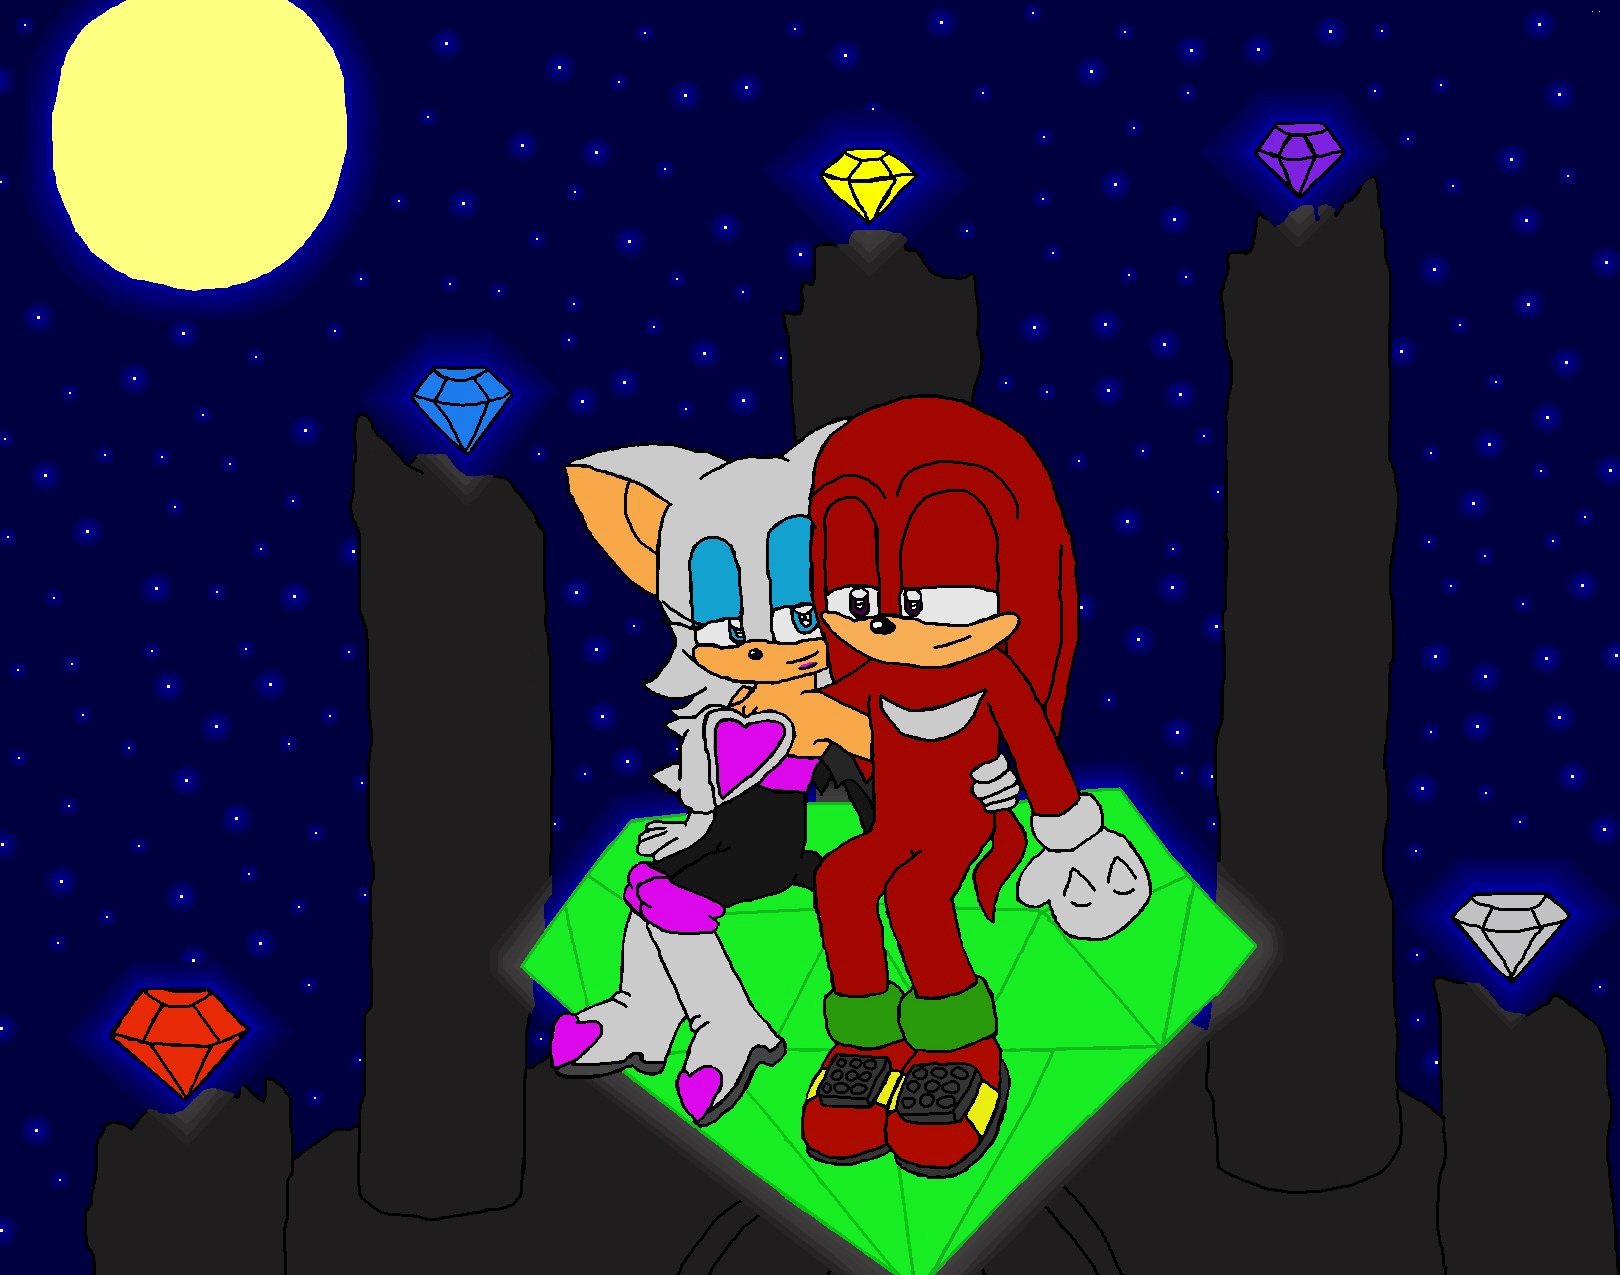 Starlight Glow (Knouge(Comic Cover)) by knux_and_rouge_fan